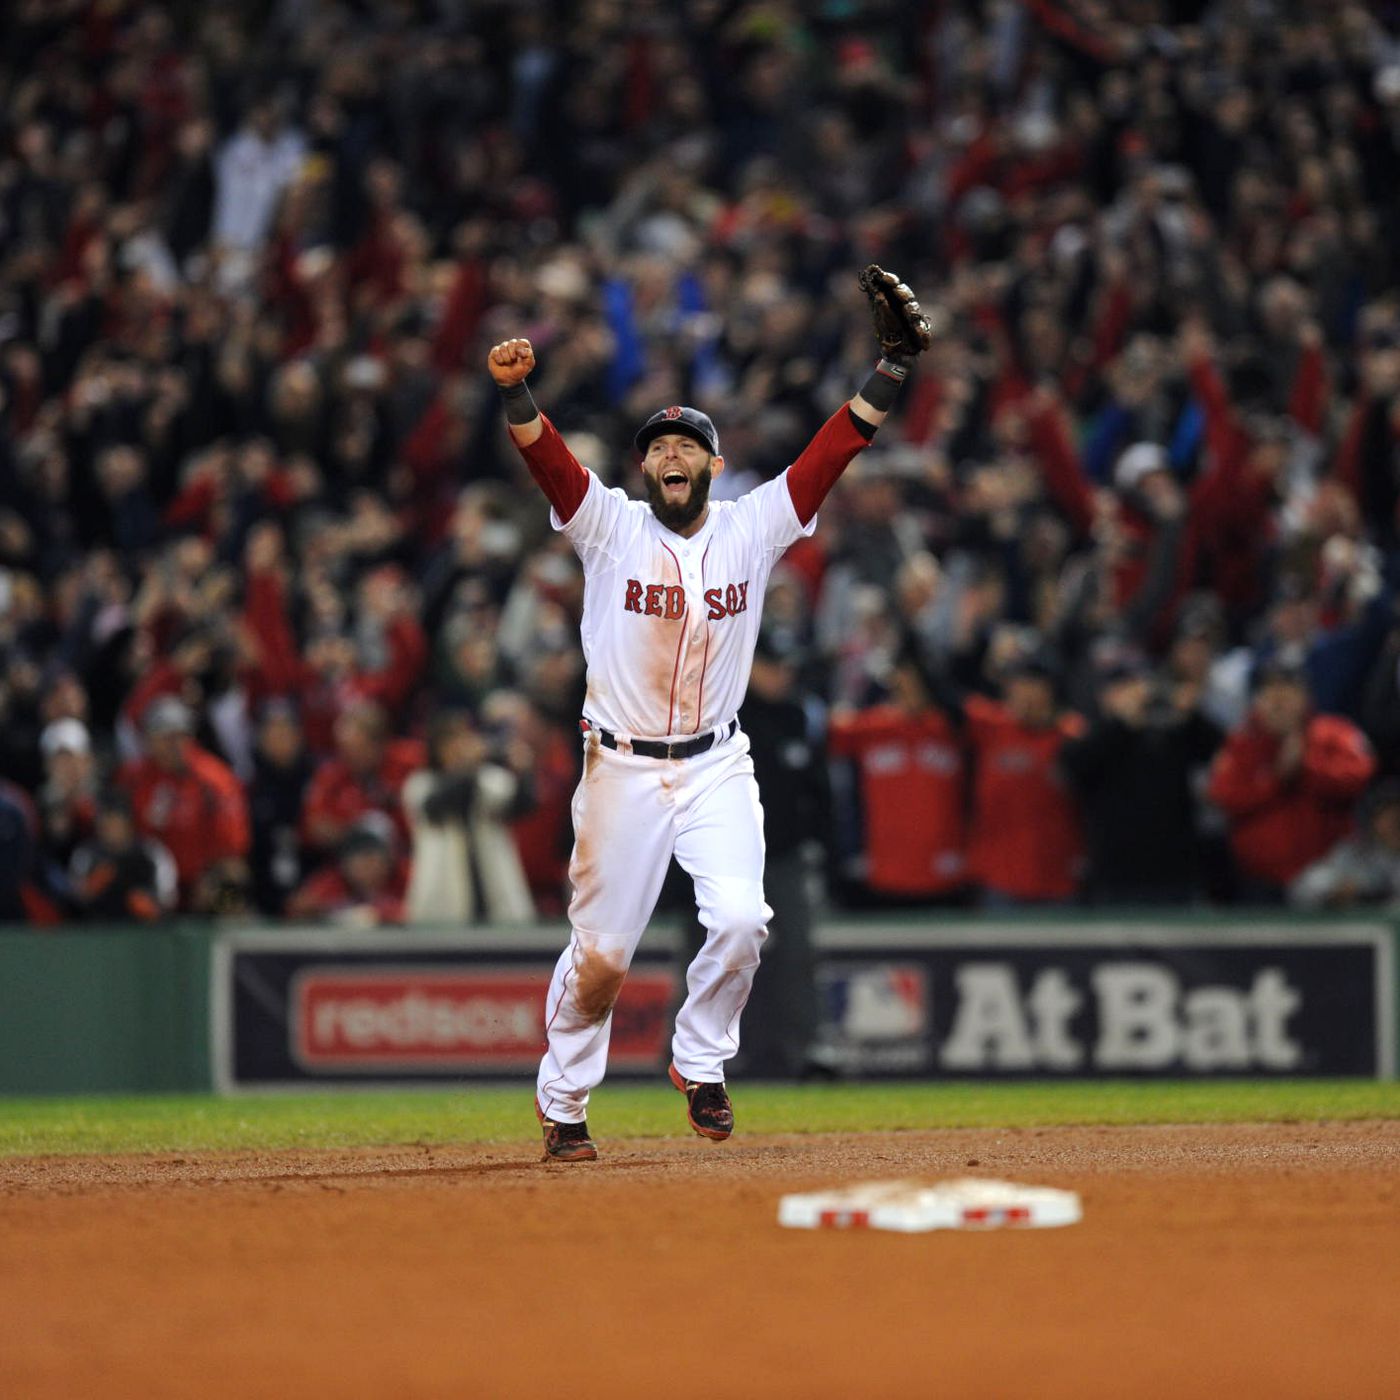 Dustin Pedroia announces his retirement from the Boston Red Sox and baseball the Monster